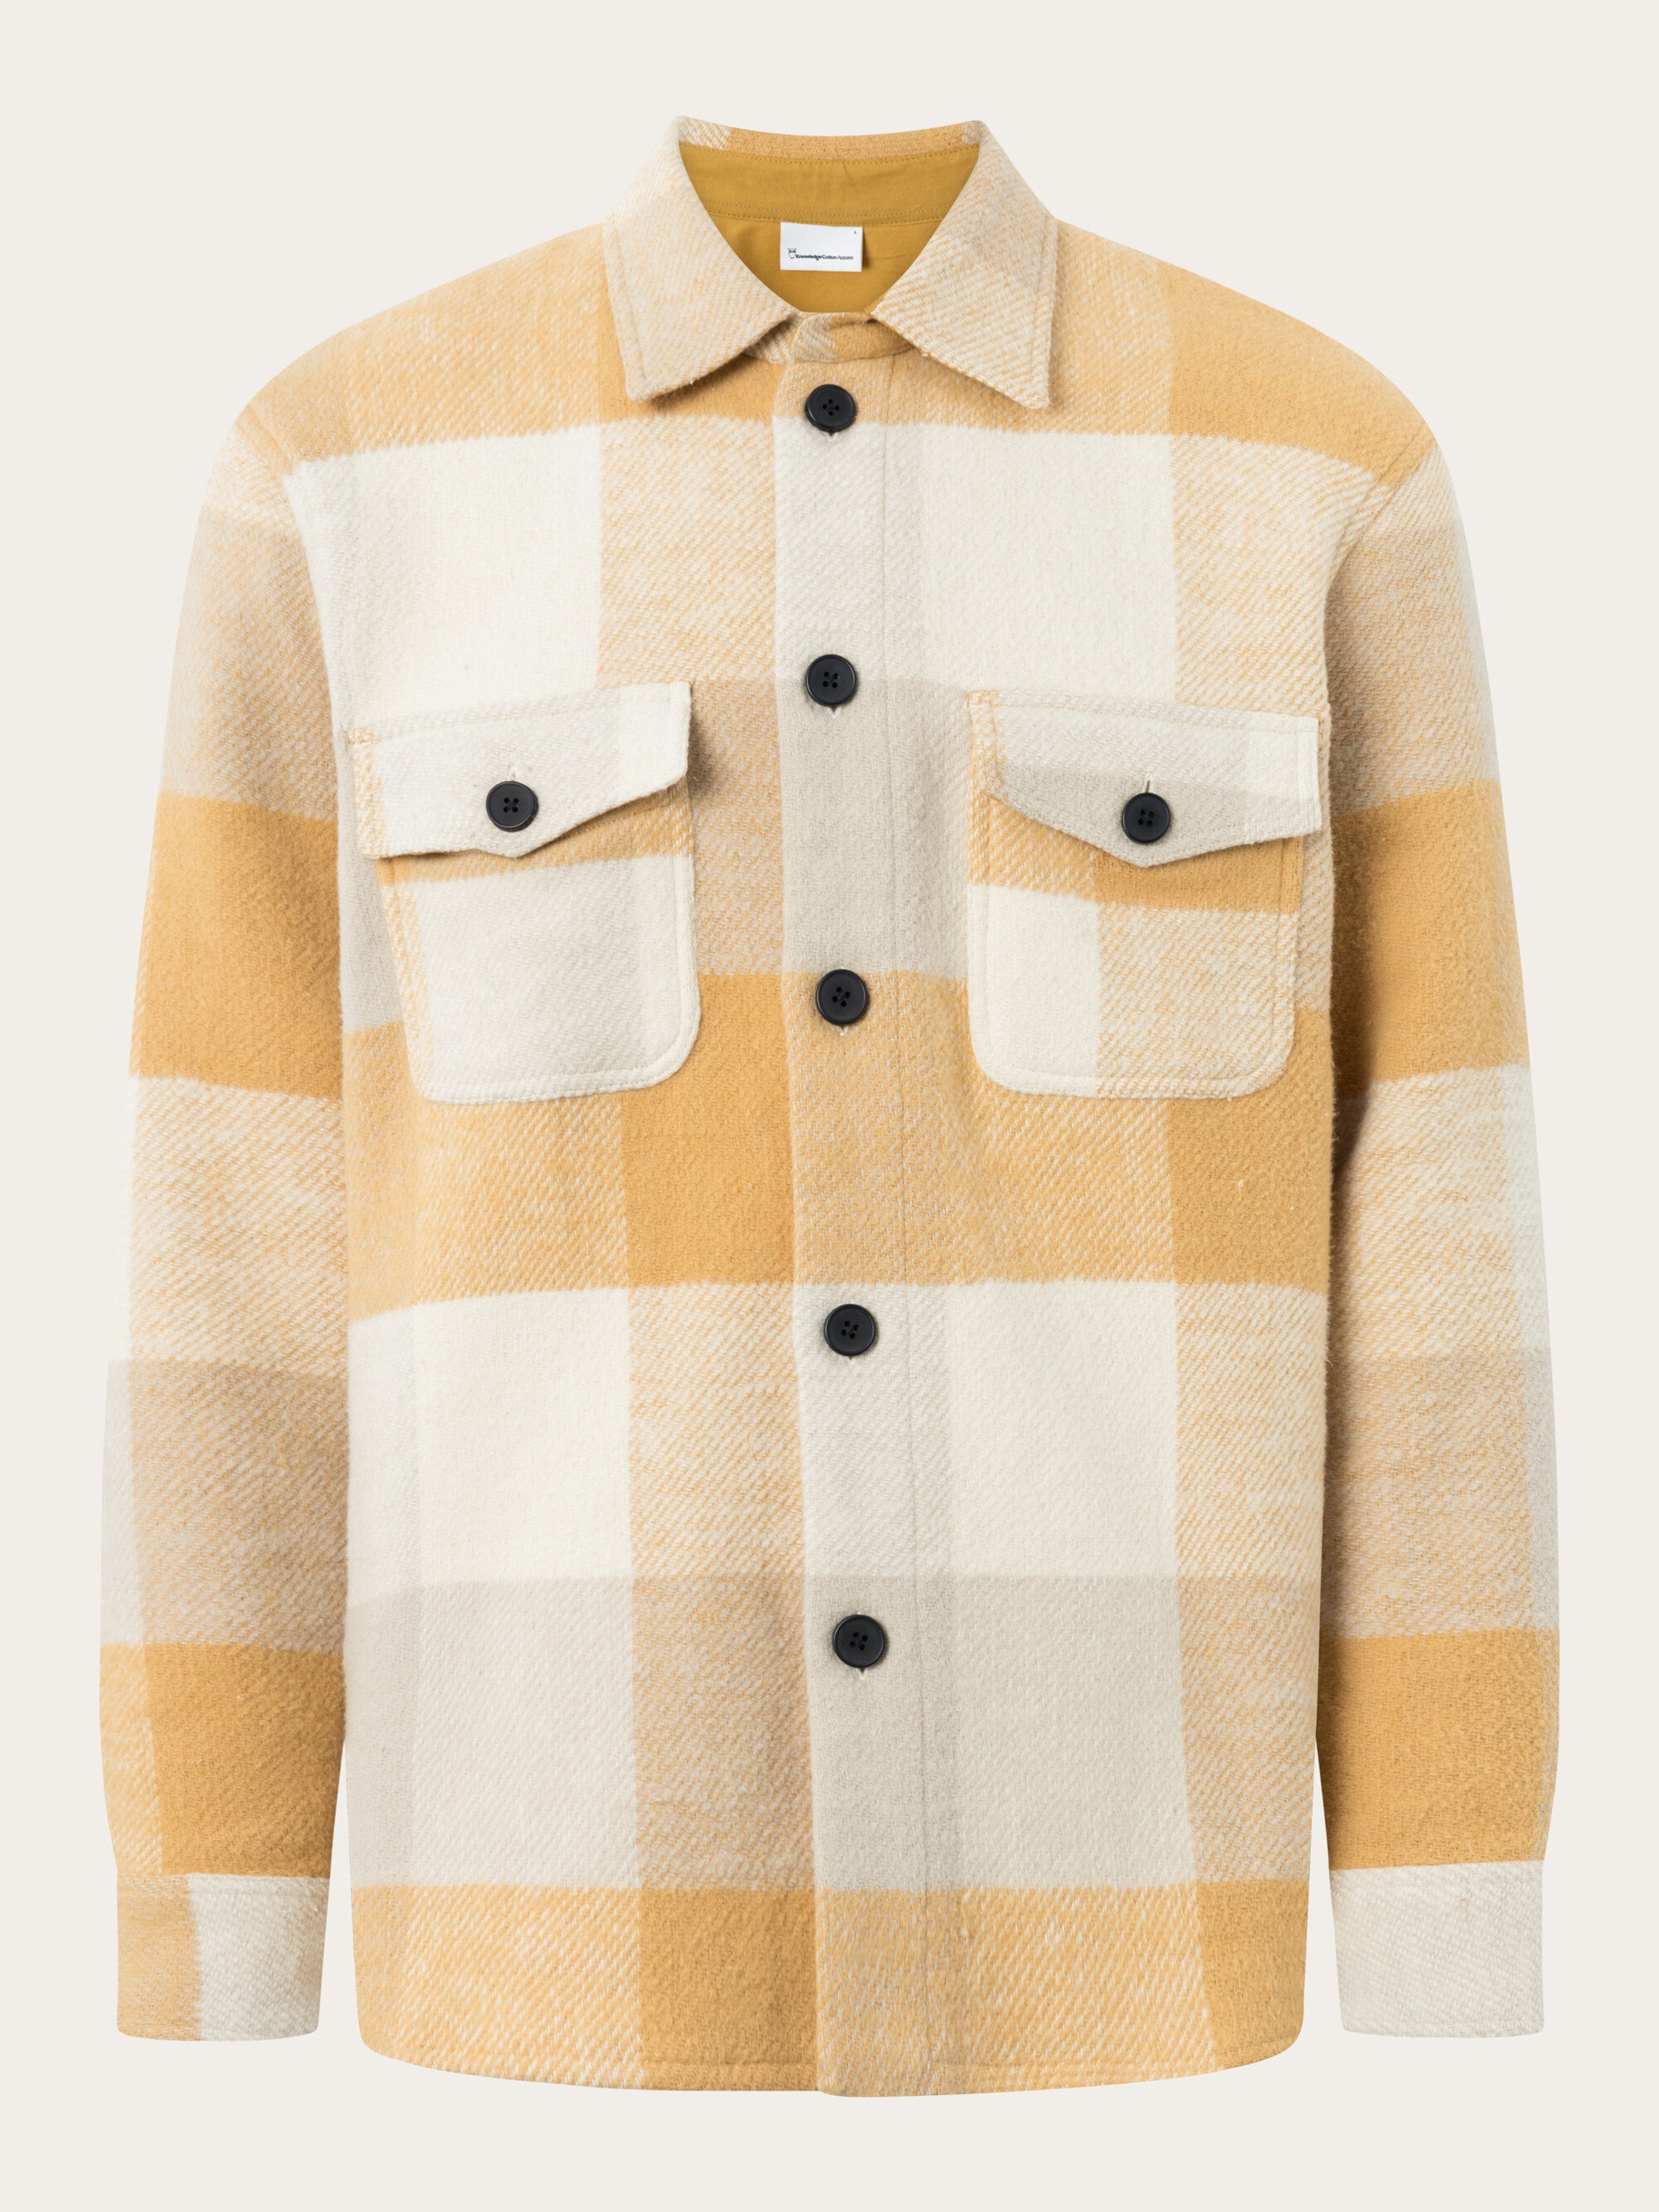 Buy Checked overshirt - Yellow check - from KnowledgeCotton Apparel®